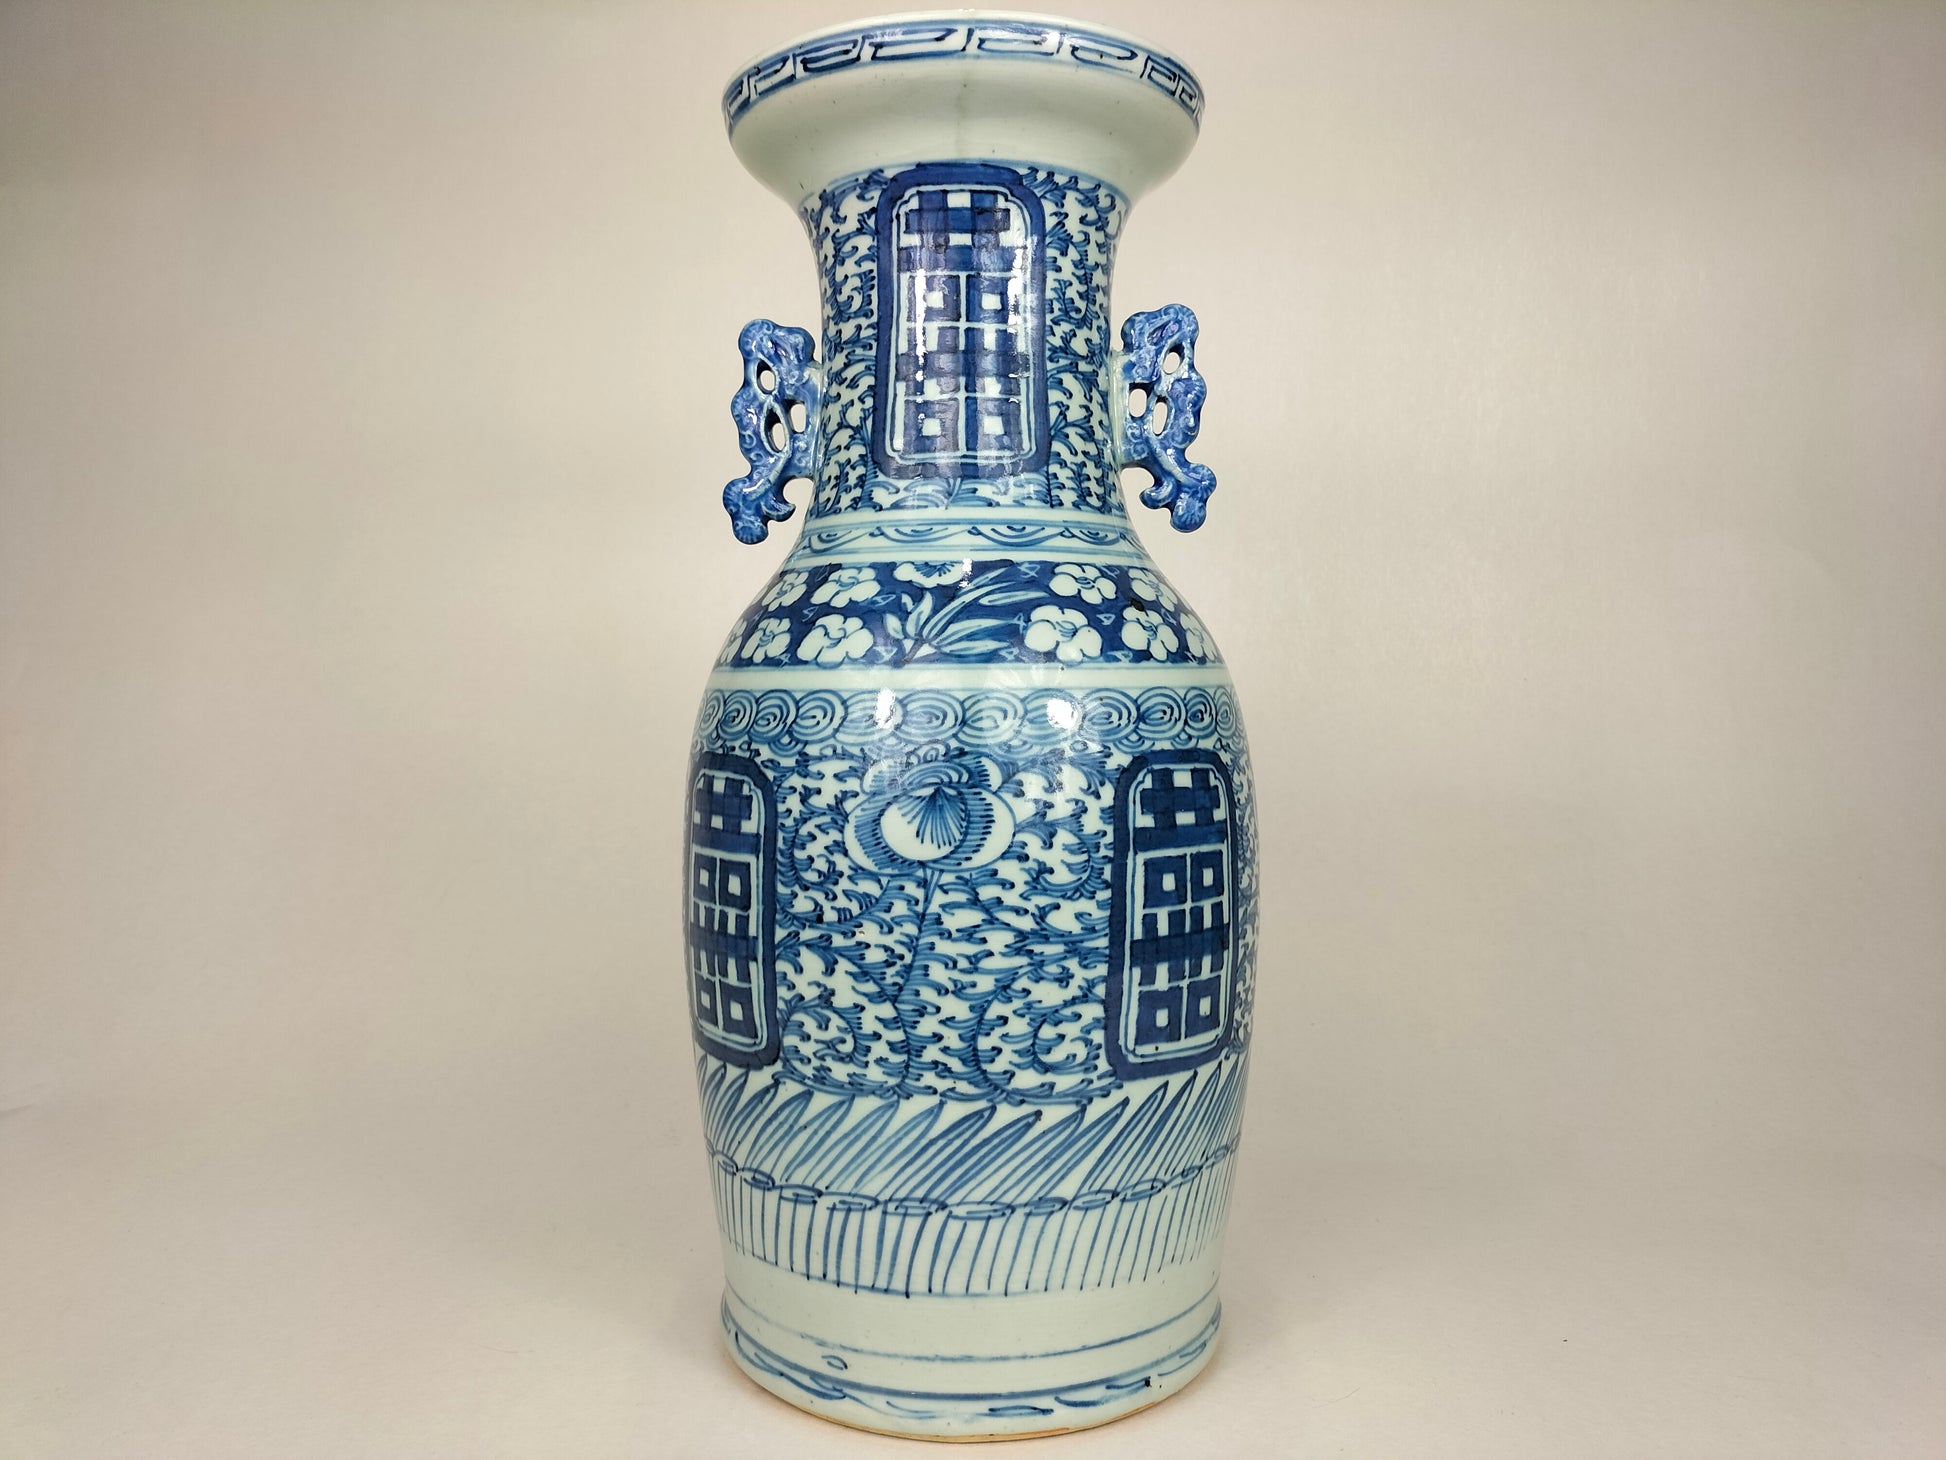 Antique 19th century blue white Chinese double happiness vase